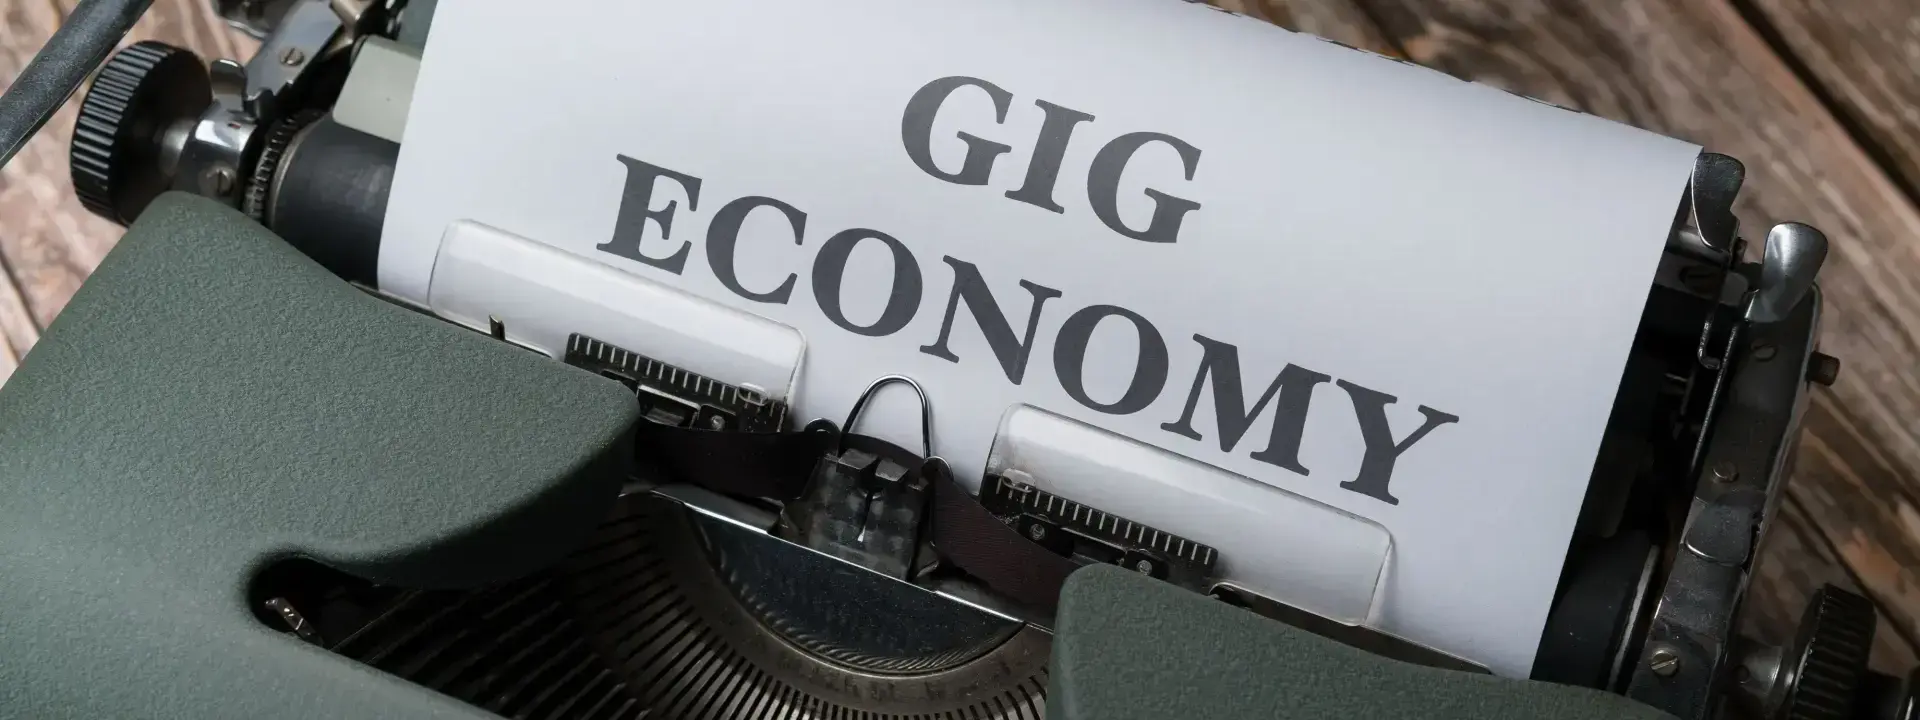 Industry Report: The Gig Economy